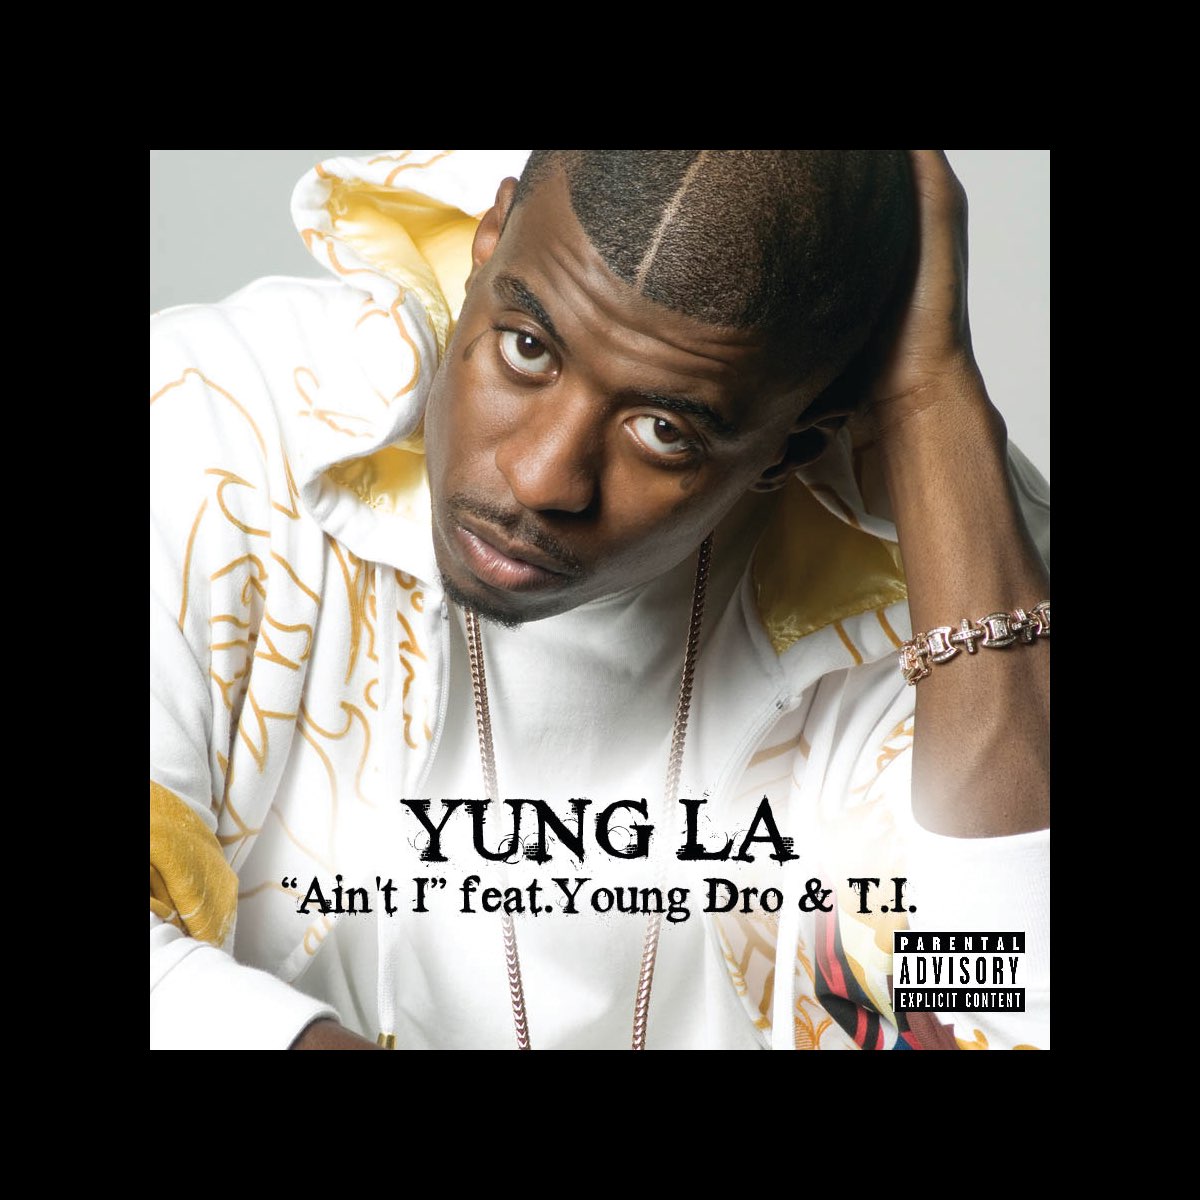 Ain't I (feat. Young Dro & T.I.) - Single - Album by Yung L.A. - Apple Music